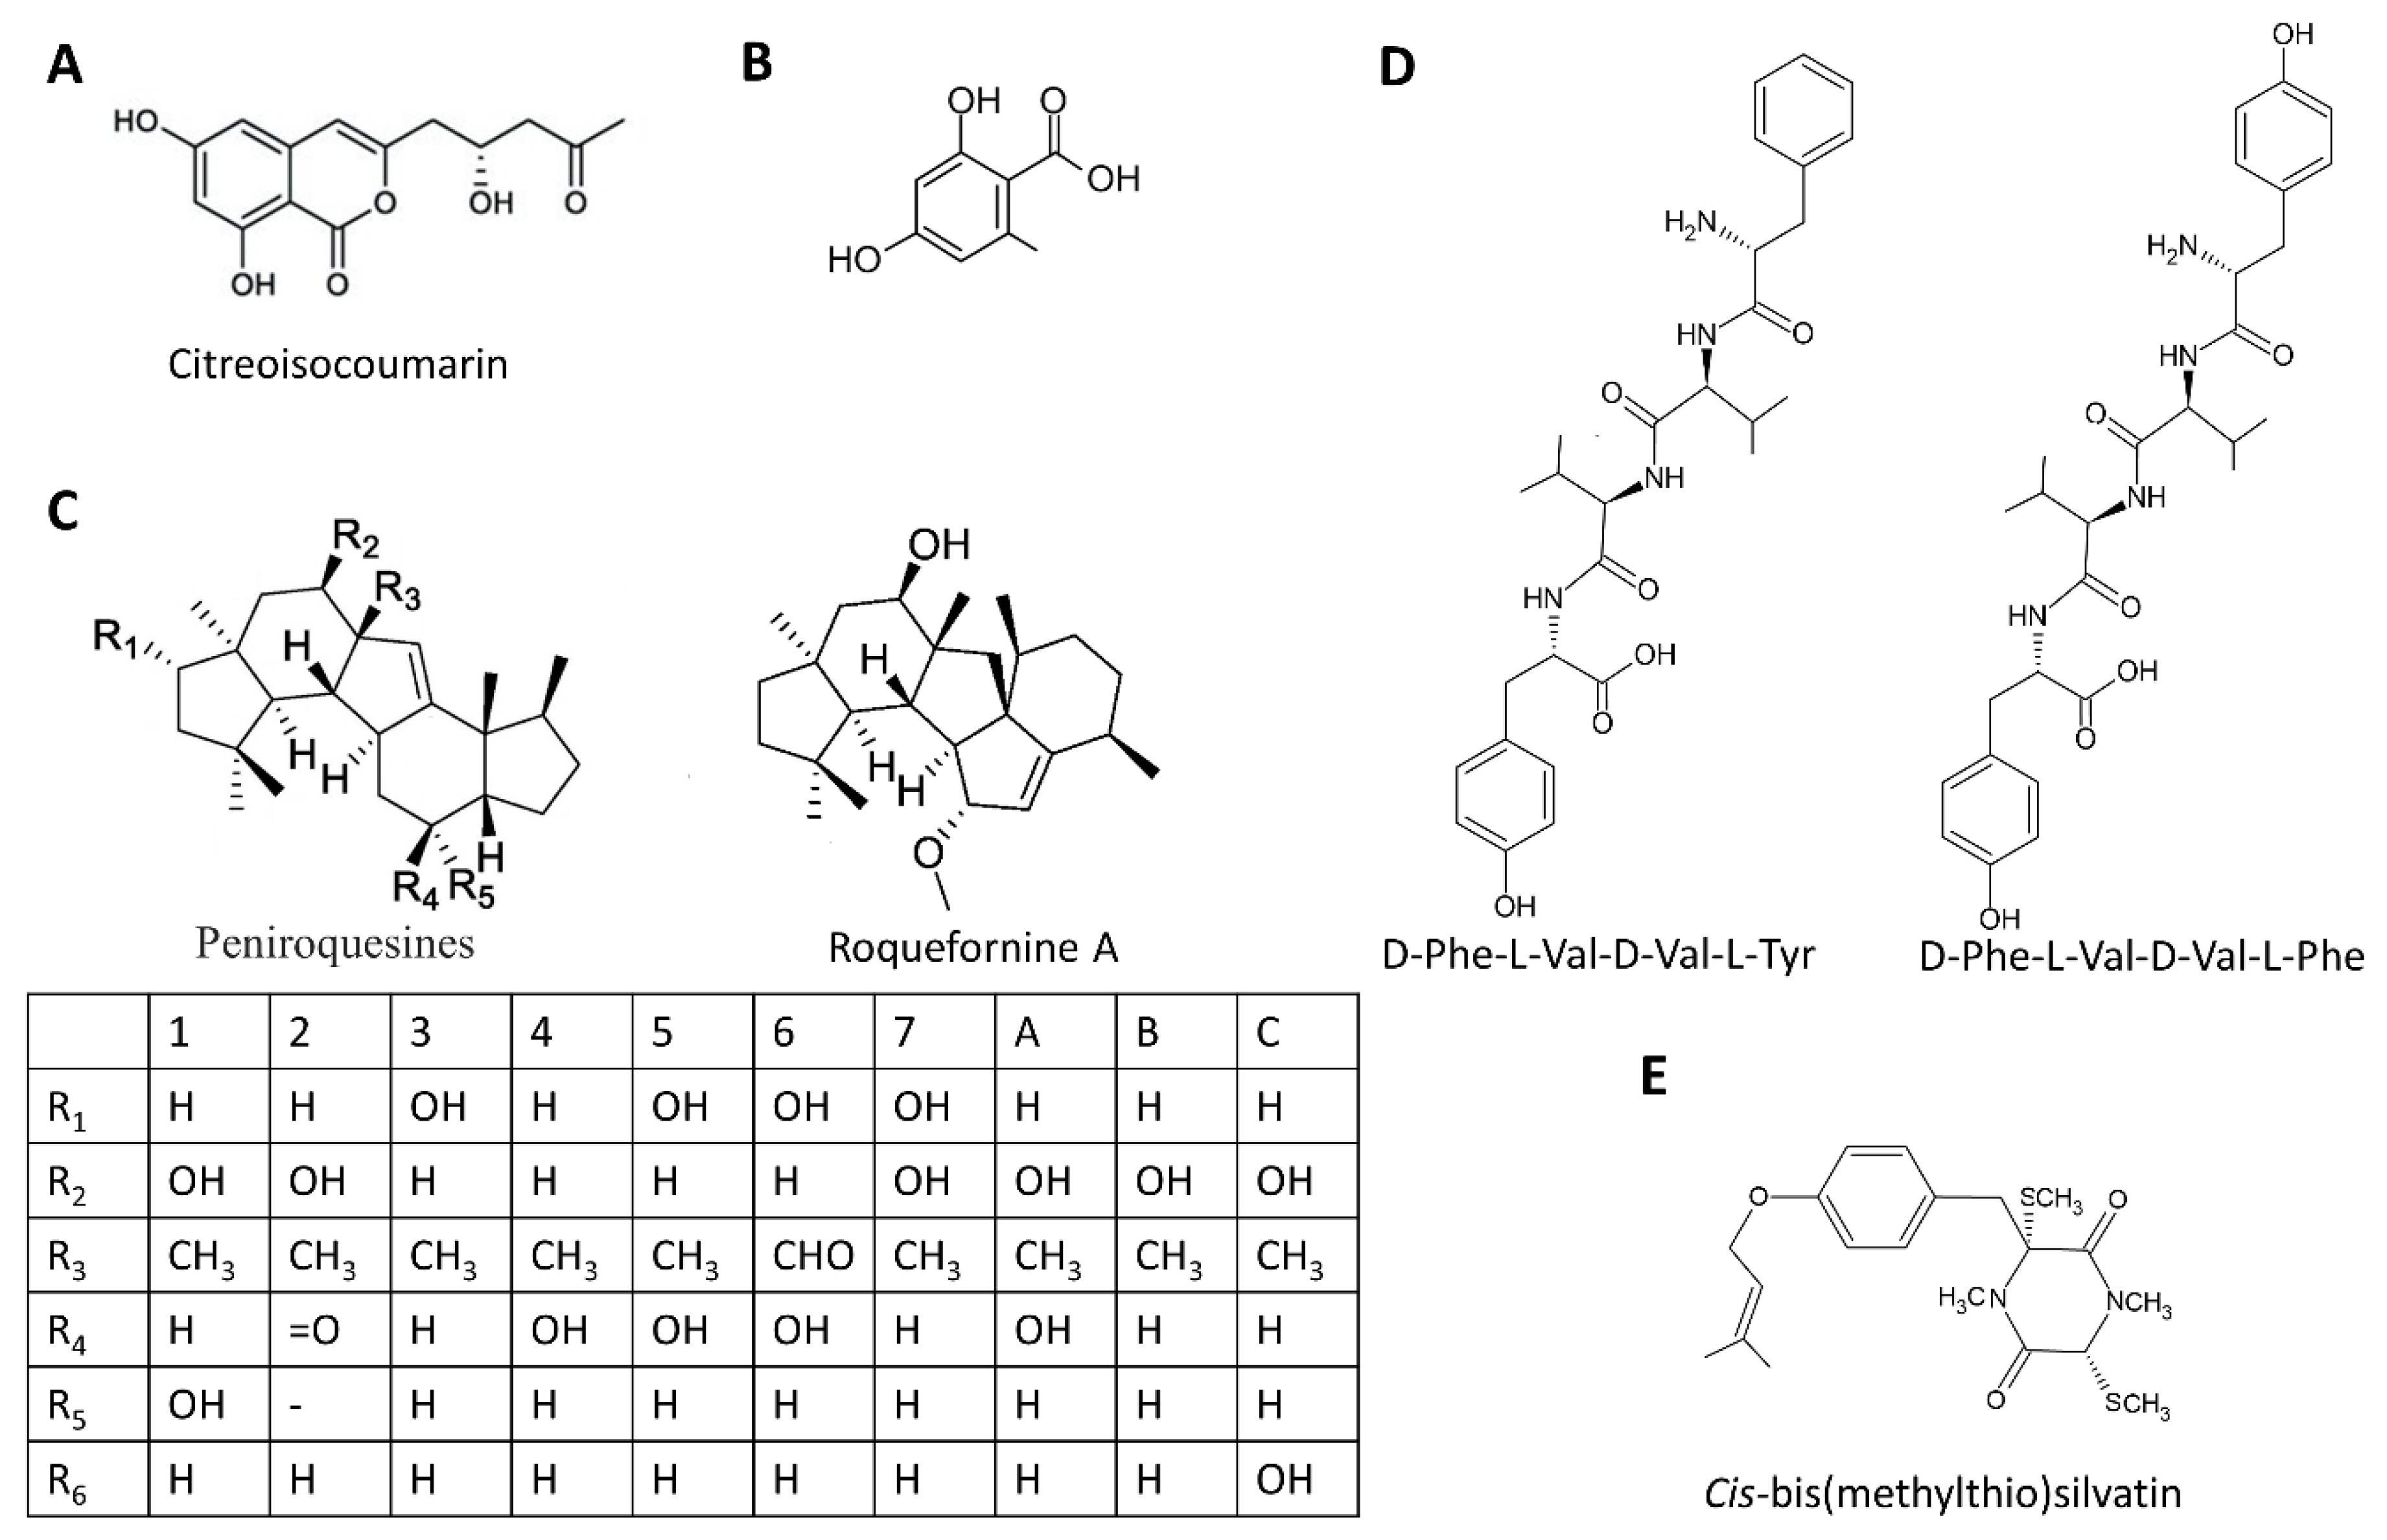 Epipolythiodioxopiperazine‐Based Natural Products: Building Blocks,  Biosynthesis and Biological Activities - Huber - 2022 - ChemBioChem - Wiley  Online Library